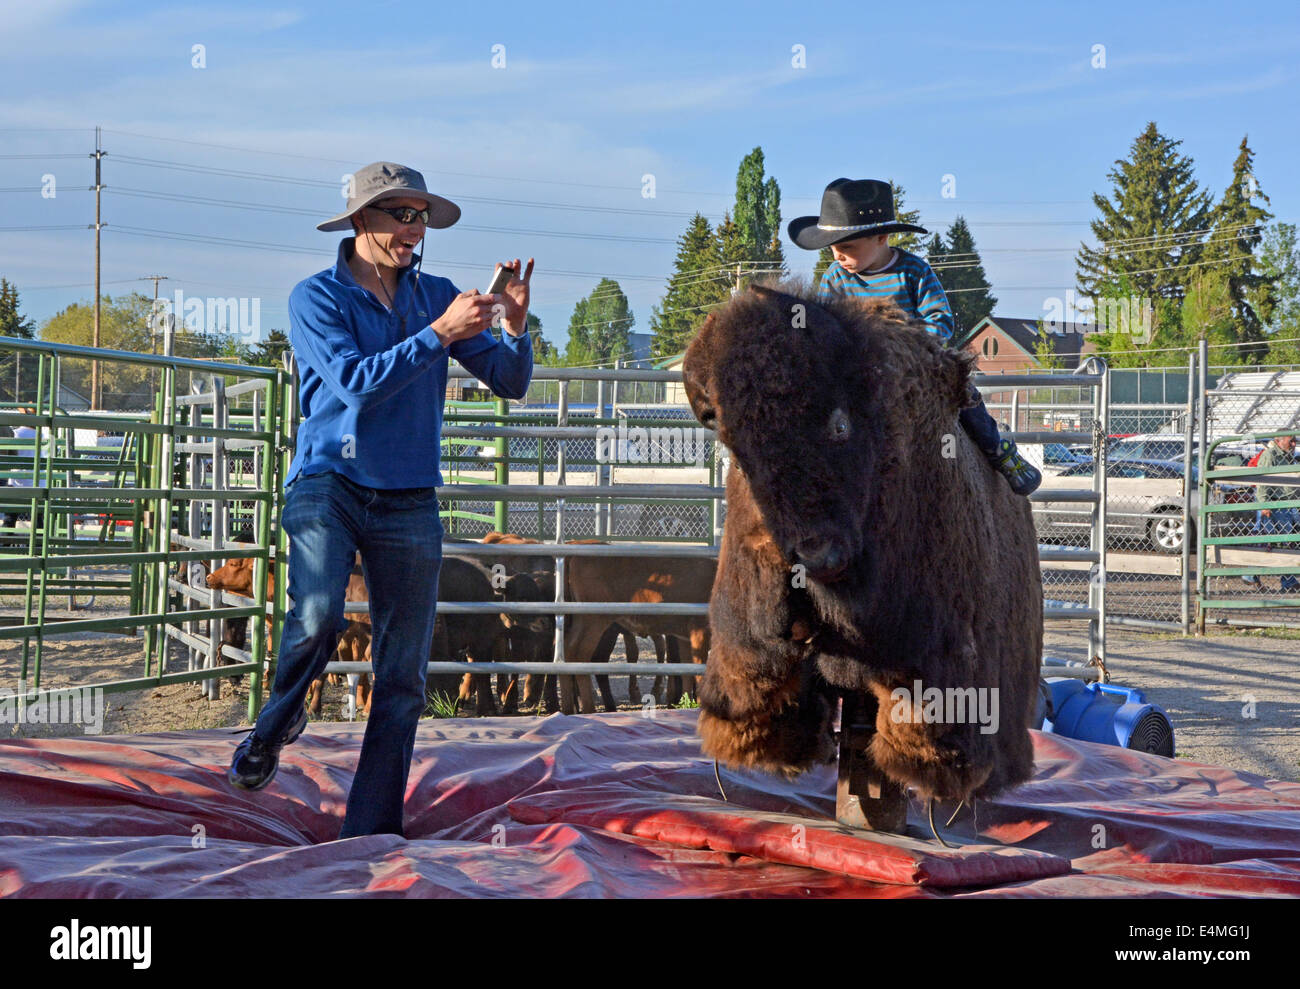 A father taking a photo of his son on a mechanical bison at the rodeo in Jackson Hole, Wyoming Stock Photo